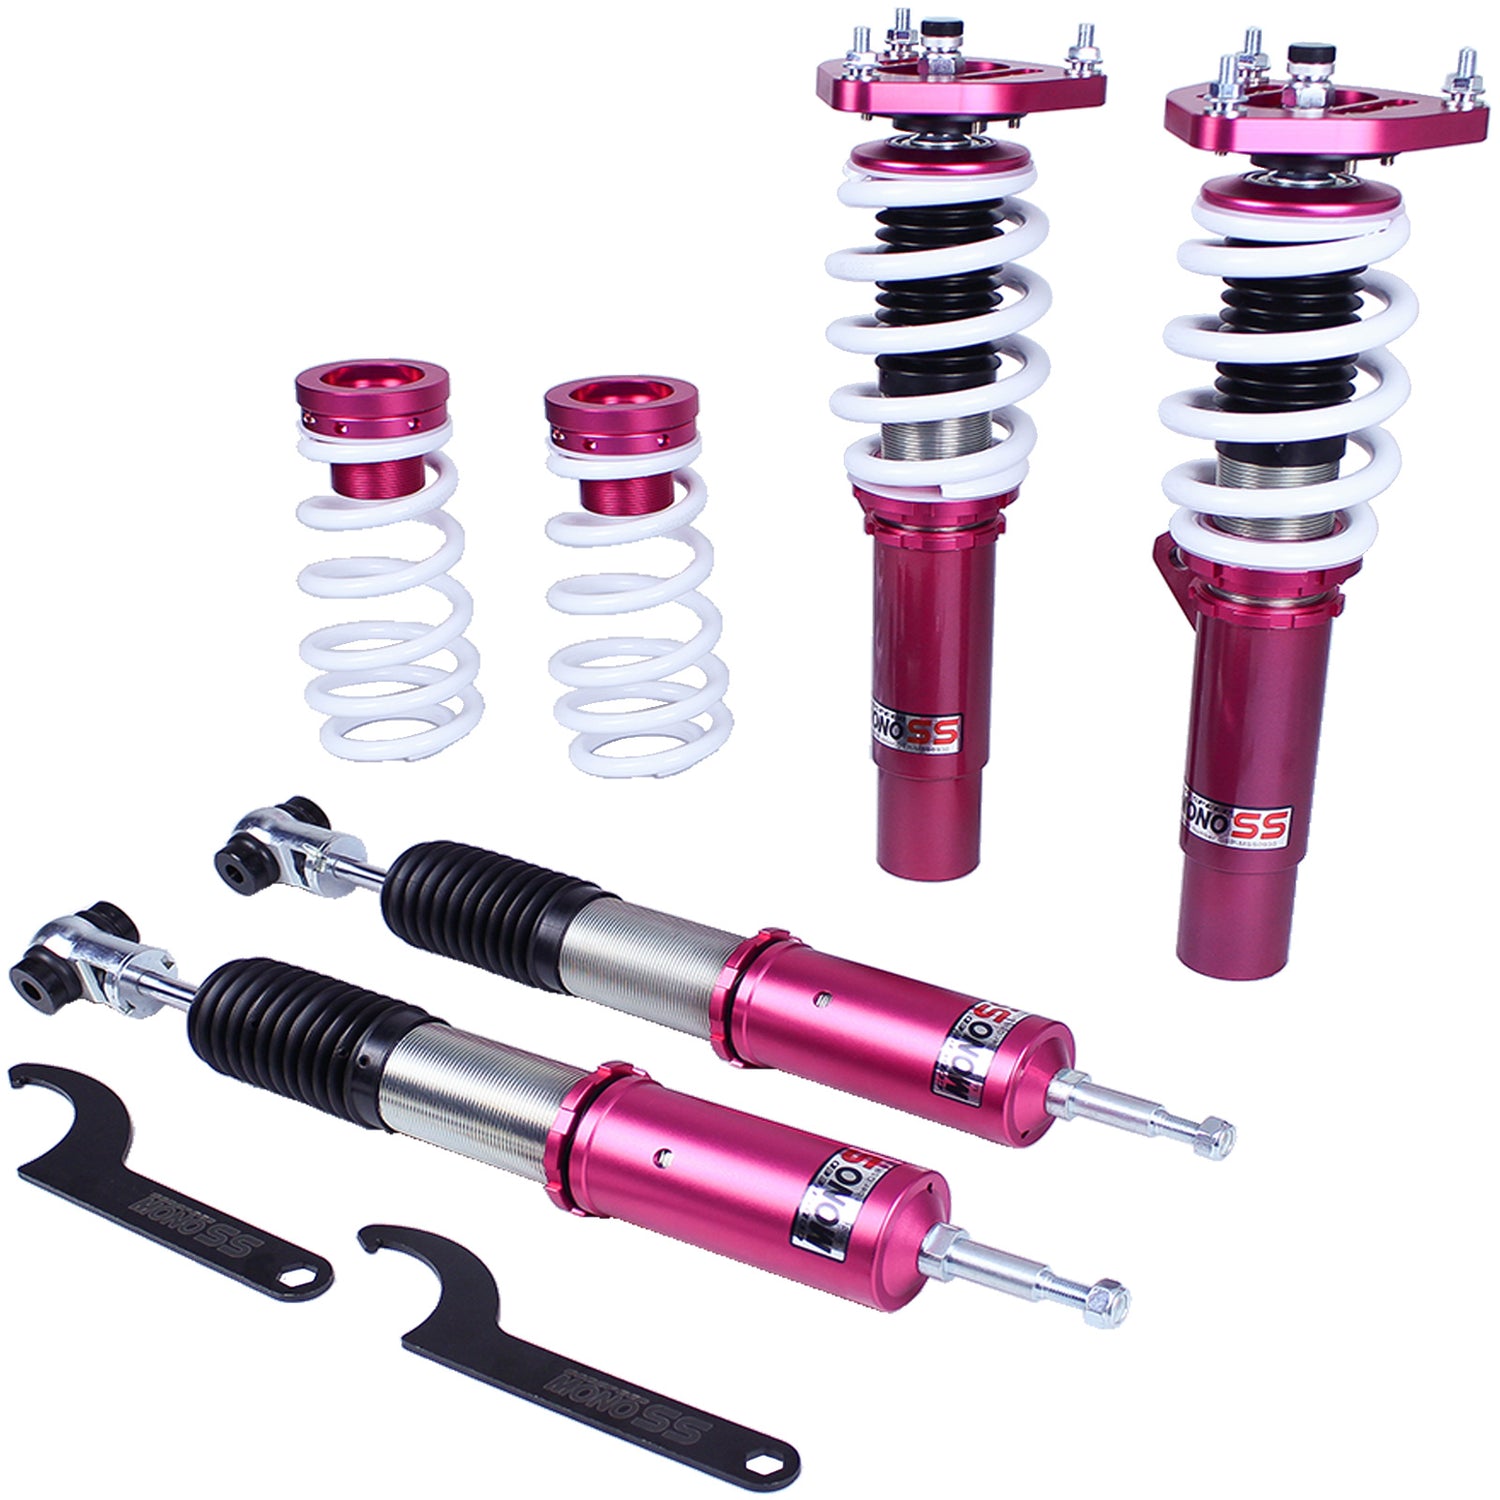 Godspeed MSS0930-C MonoSS Coilover Lowering Kit, Fully Adjustable, Ride Height, Spring Tension And 16 Click Damping, Volkswagen Golf R(MK7) 2015-UP